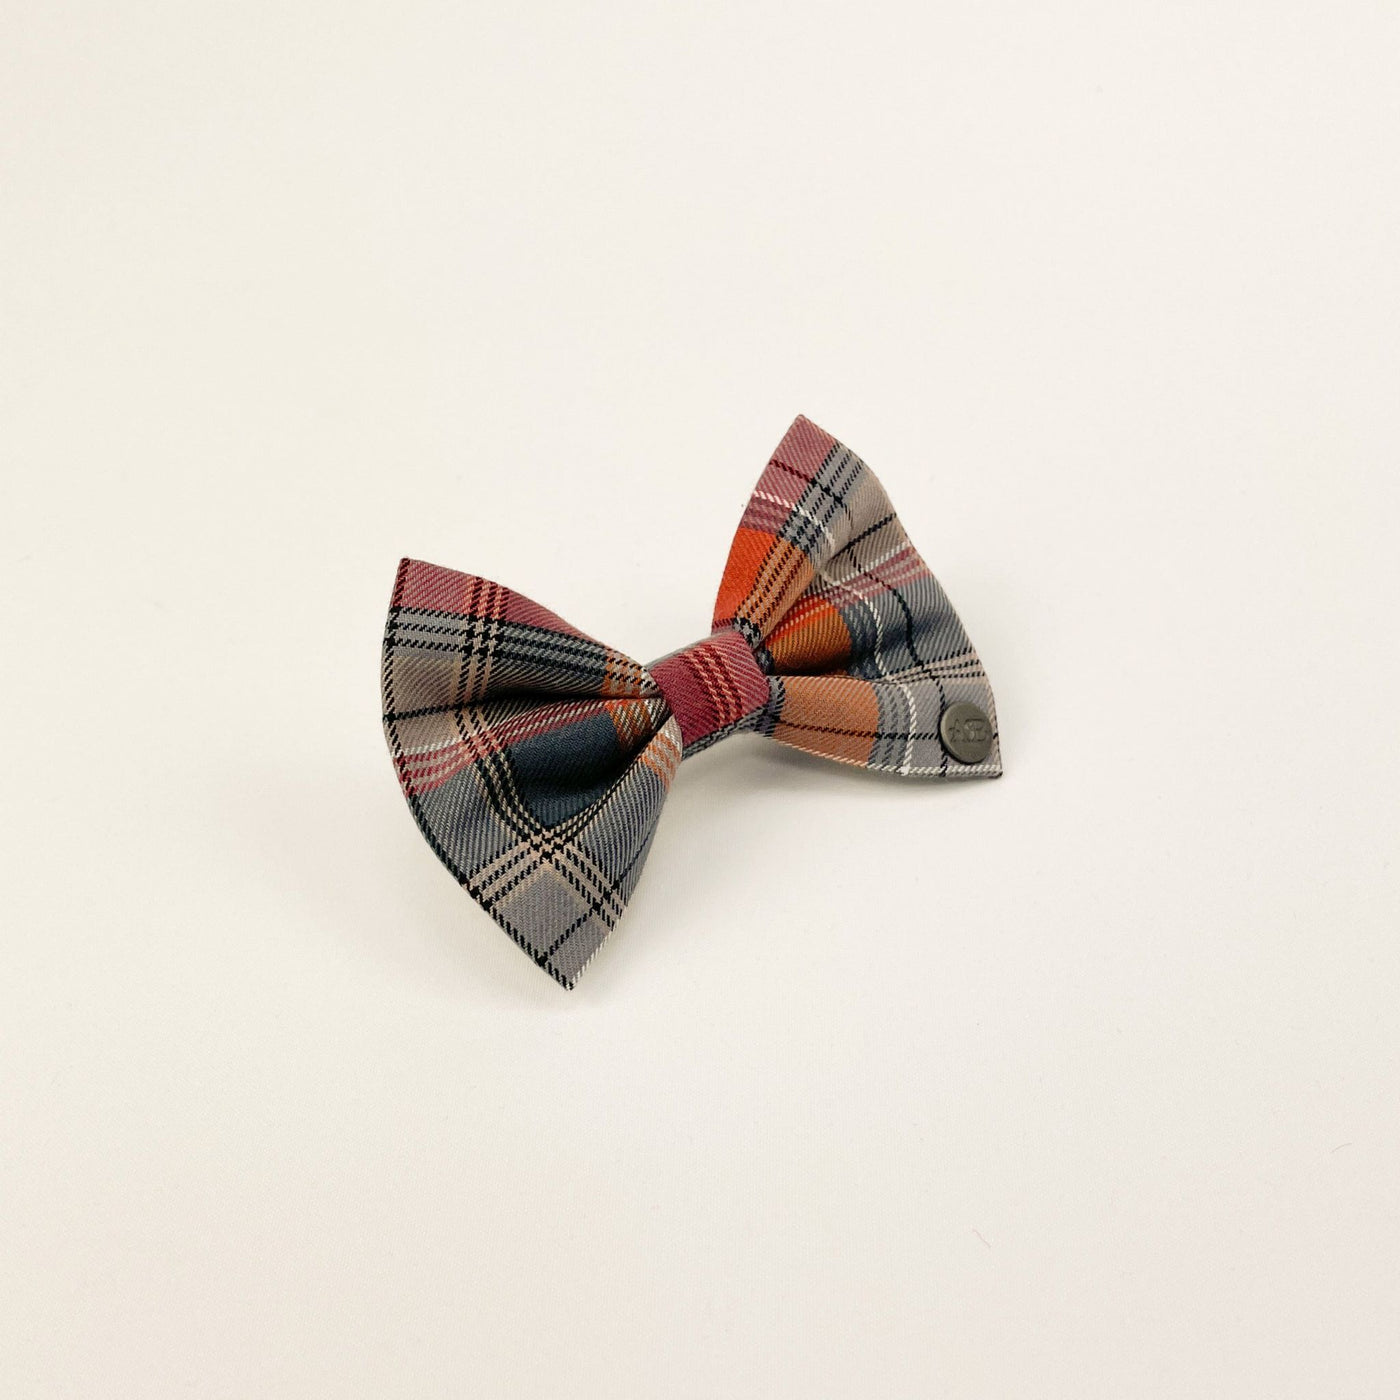 Grey and Orange Autumn Check Dog Bow Tie from the side.